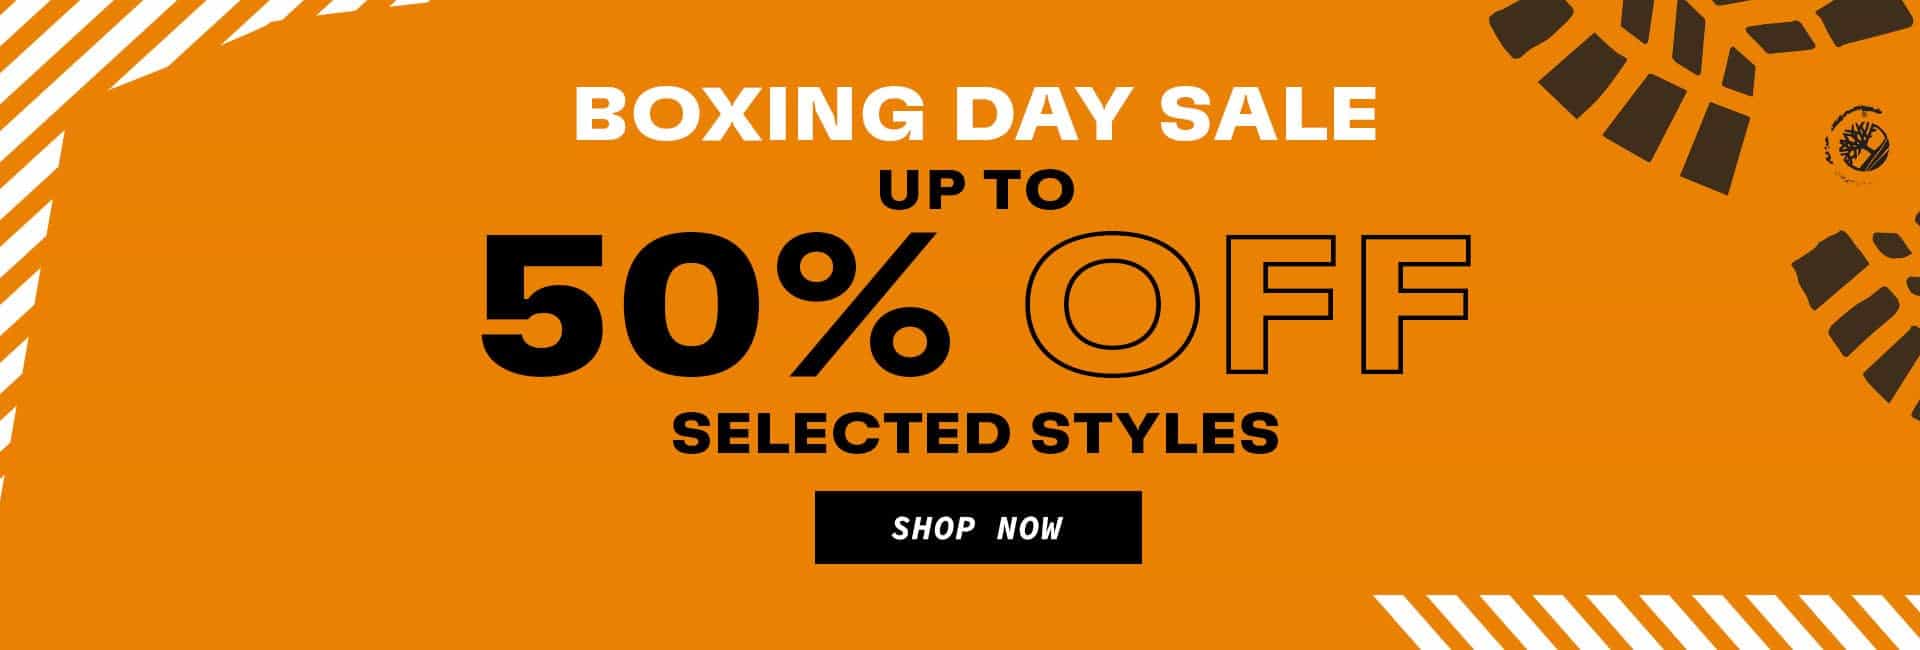 Timberland Boxing Day sale - Up to 50% OFF on selected styles